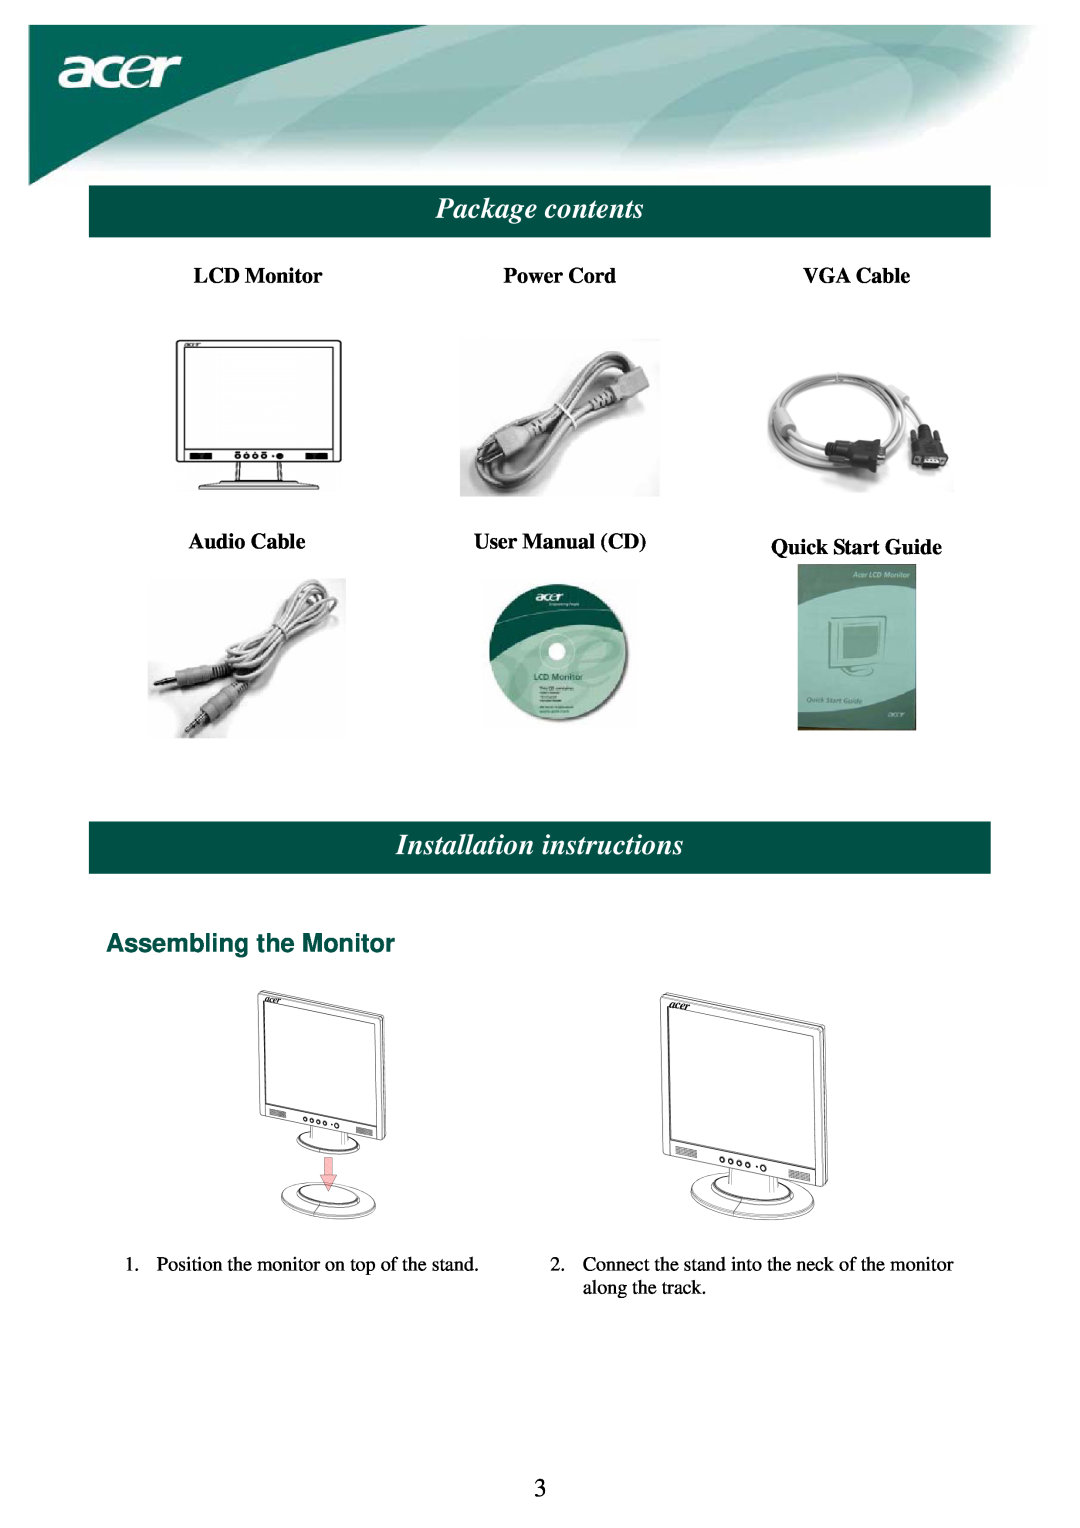 Acer Package contents, Installation instructions, Assembling the Monitor, LCD Monitor, Power Cord, VGA Cable, acer 